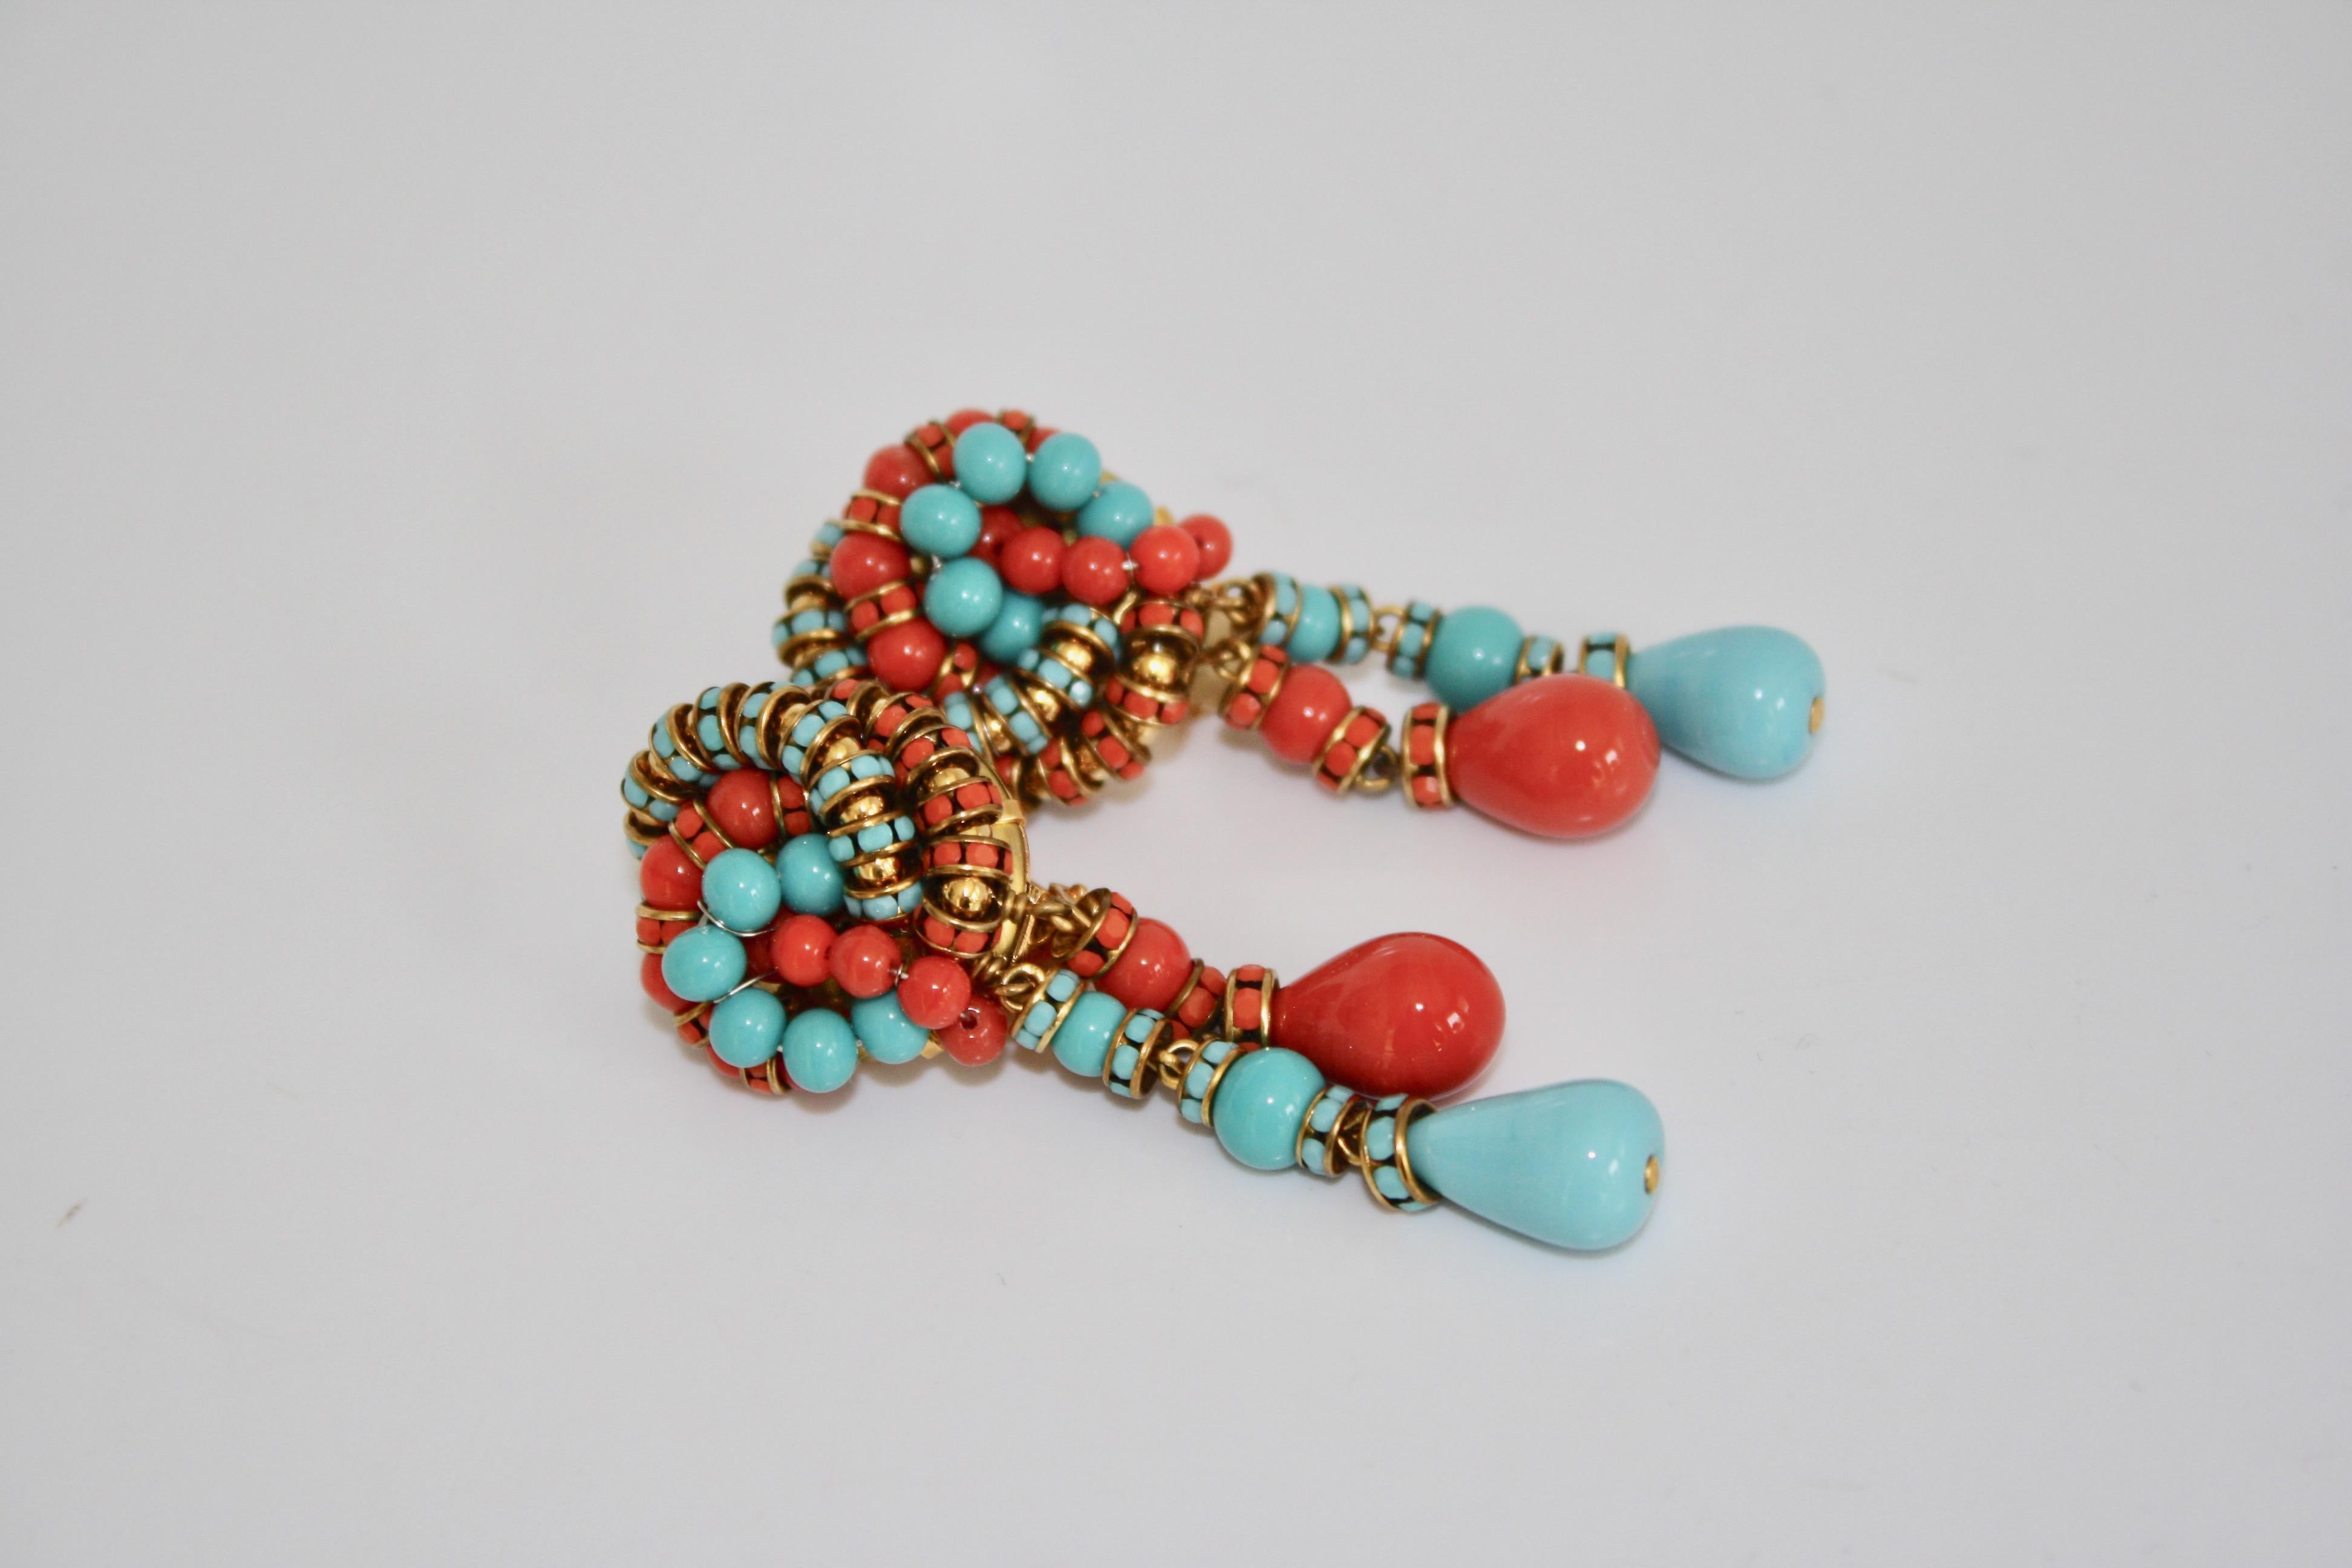 Knot and double drop clip earrings in turquoise and orange glass from Francoise Montague. 